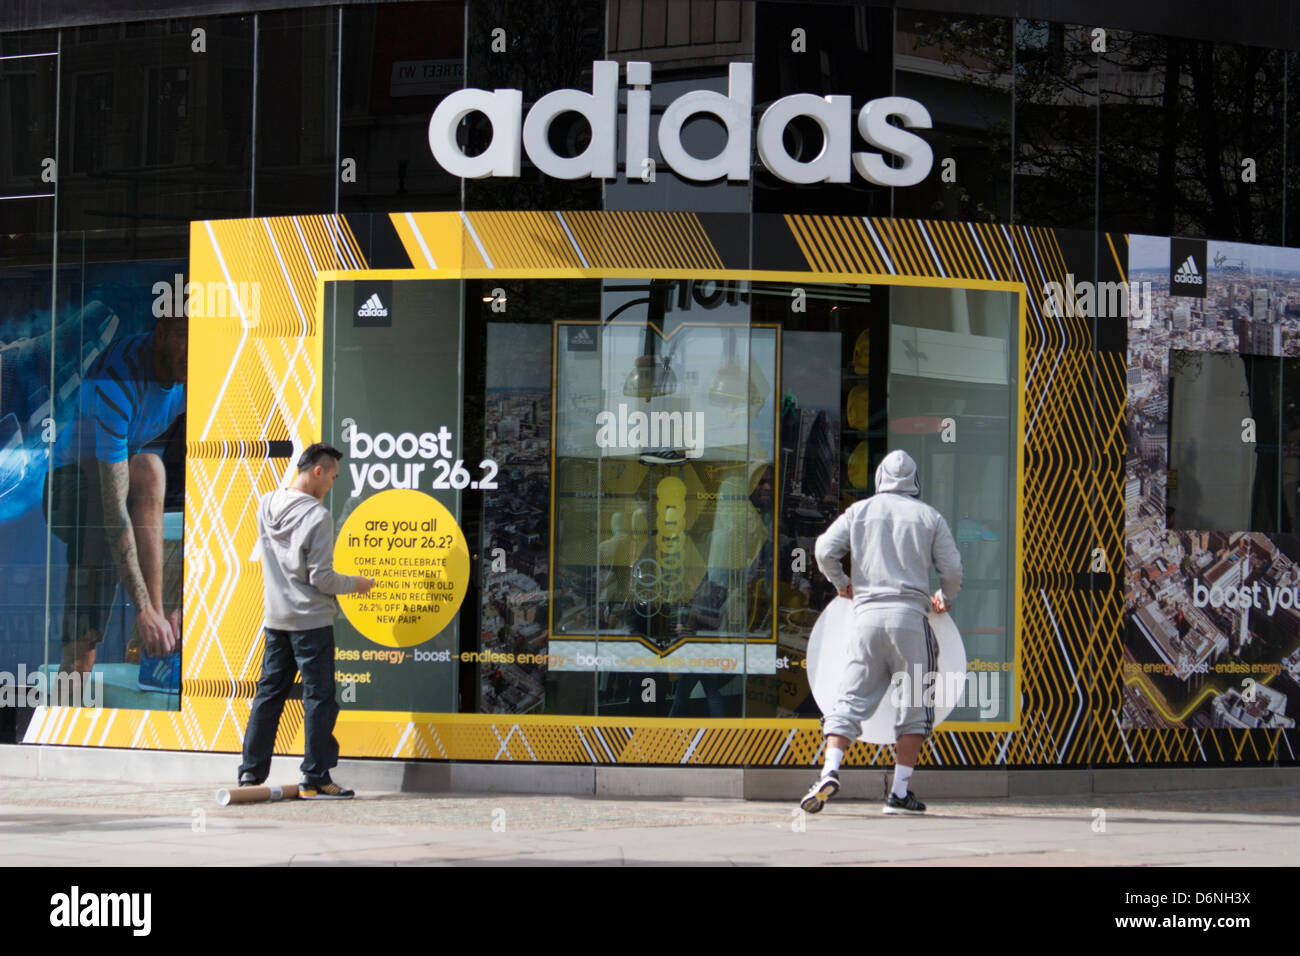 adidas oxford street opening times